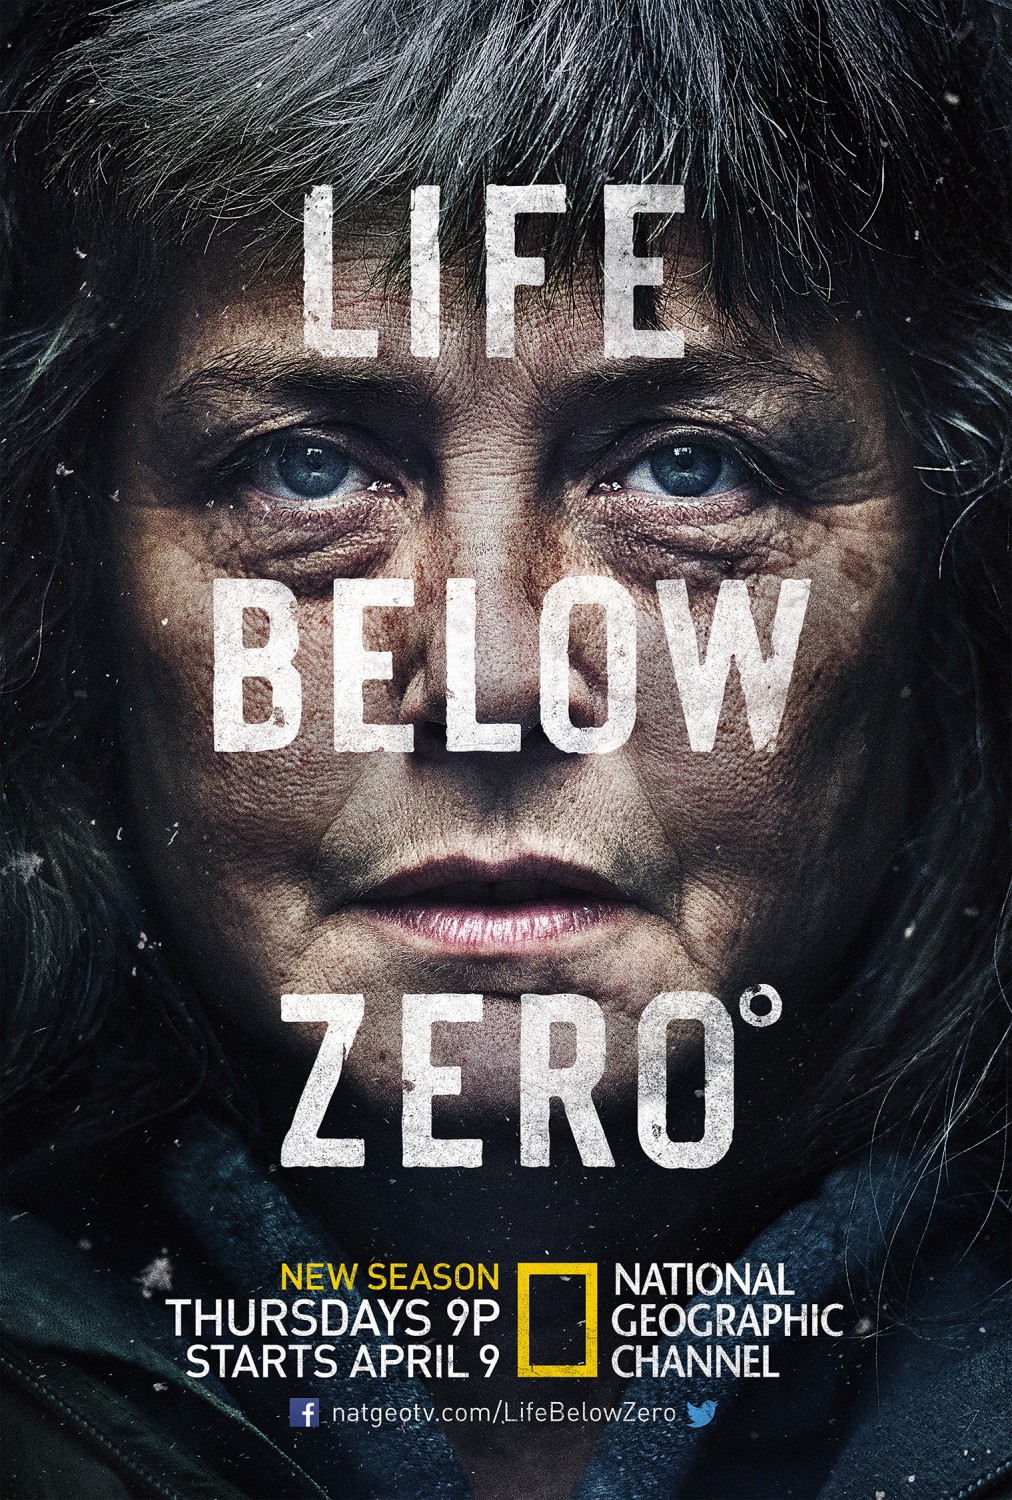 Extra Large TV Poster Image for Life Below Zero (#3 of 7)